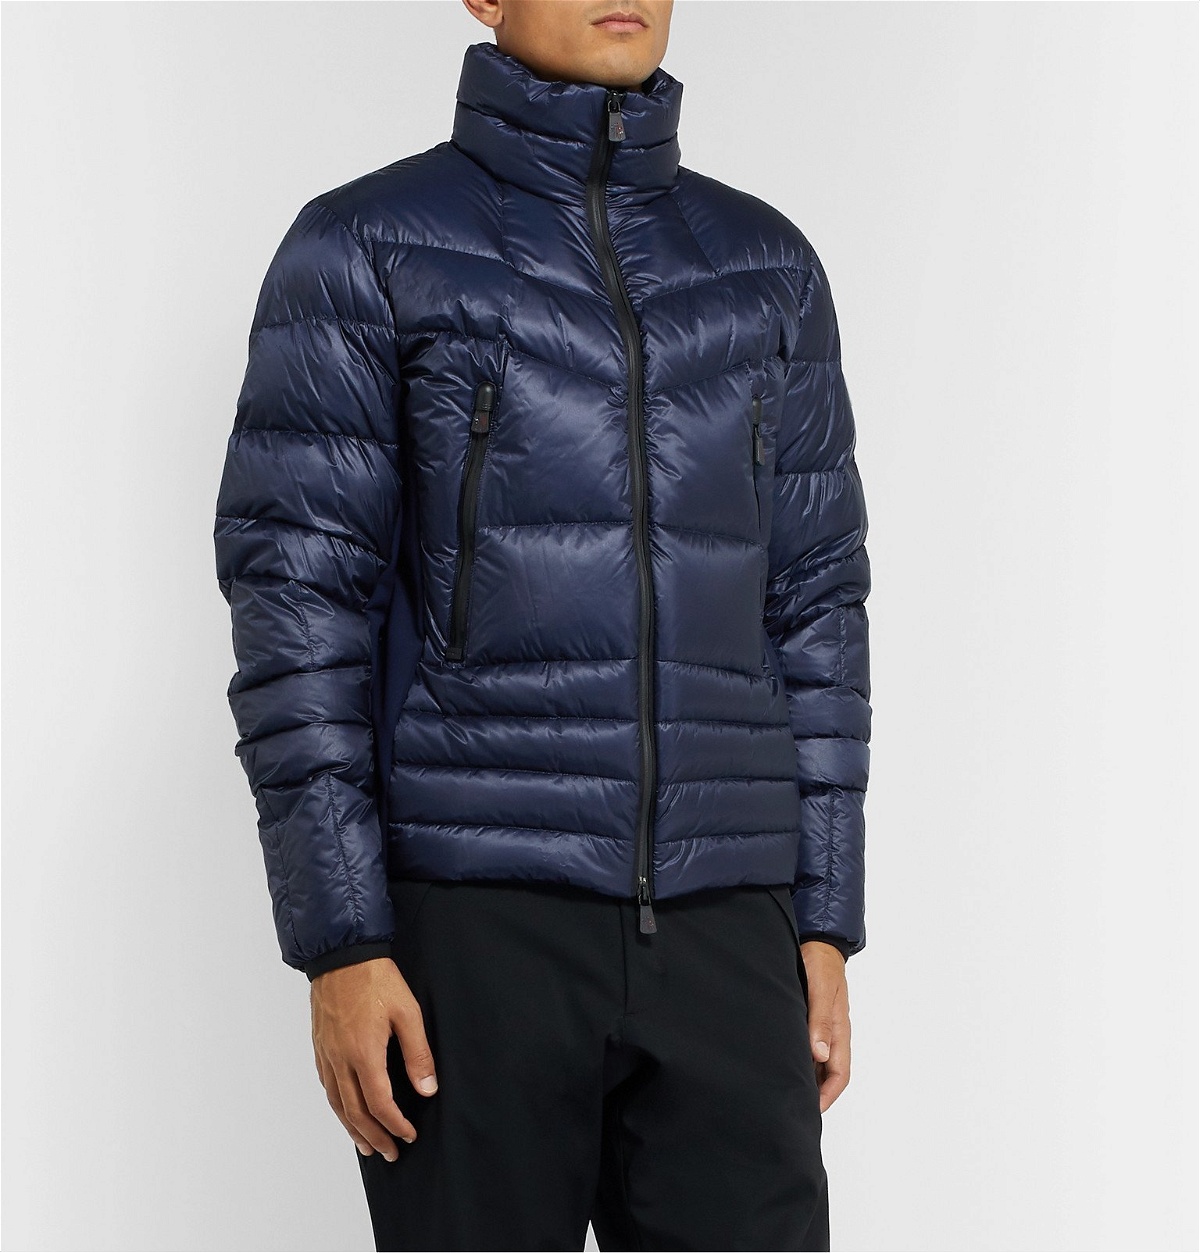 Moncler Grenoble - Canmore Quilted Nylon Down Ski Jacket - Blue Moncler ...